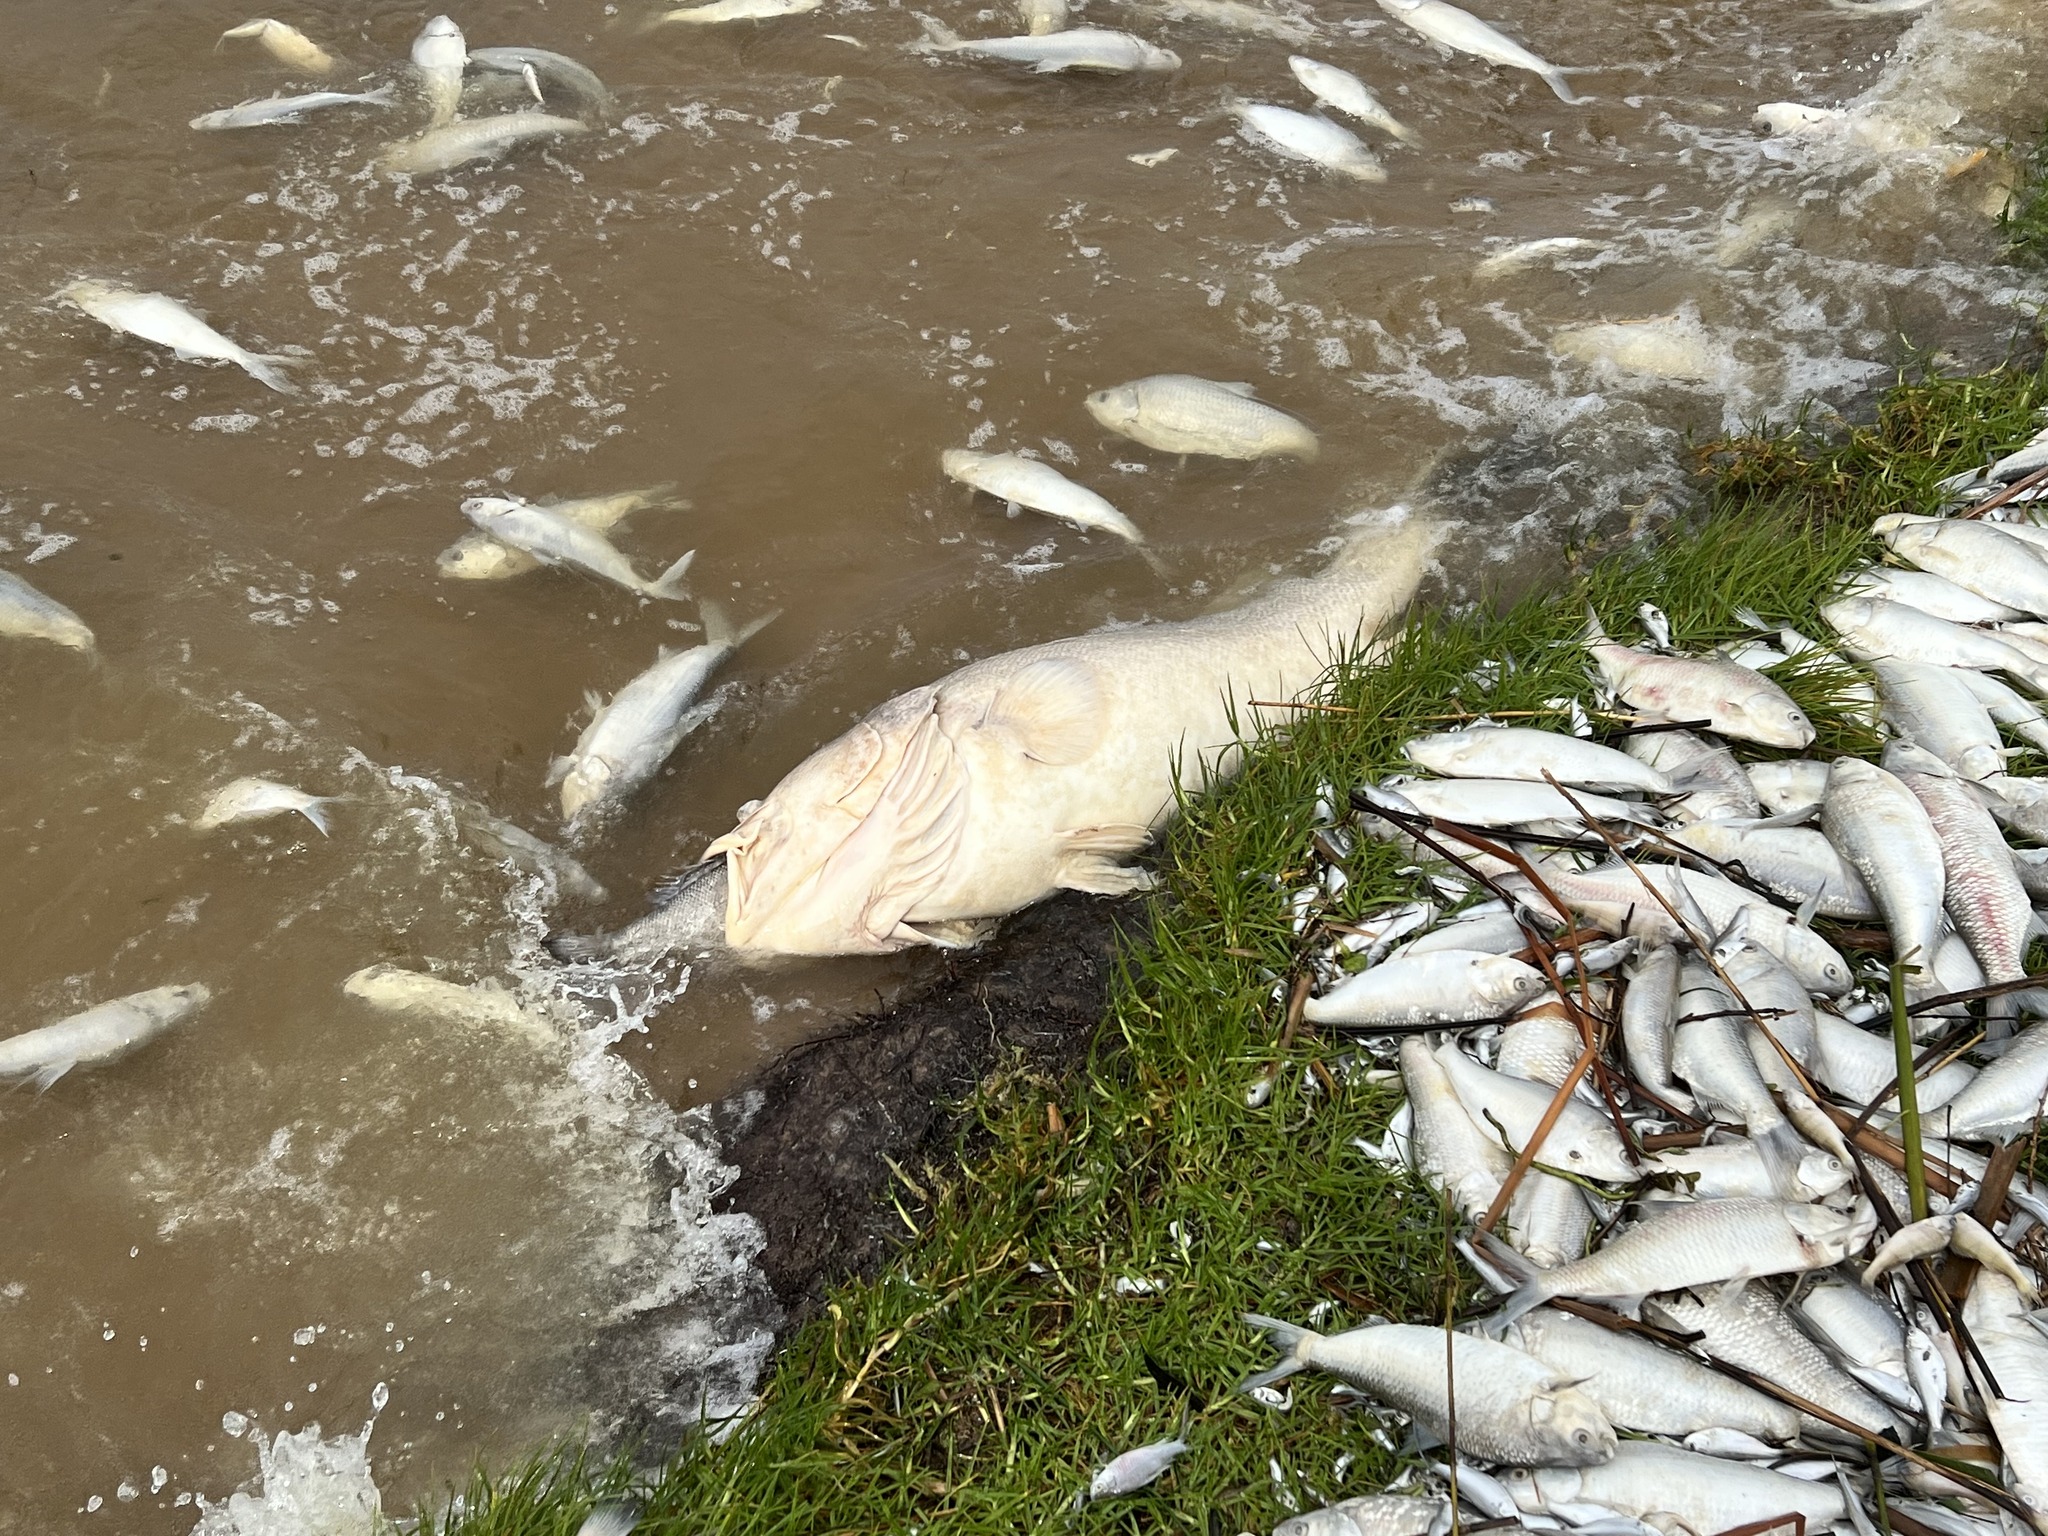 A dead Murray cod surrounded by other dead fish by a grassy bank